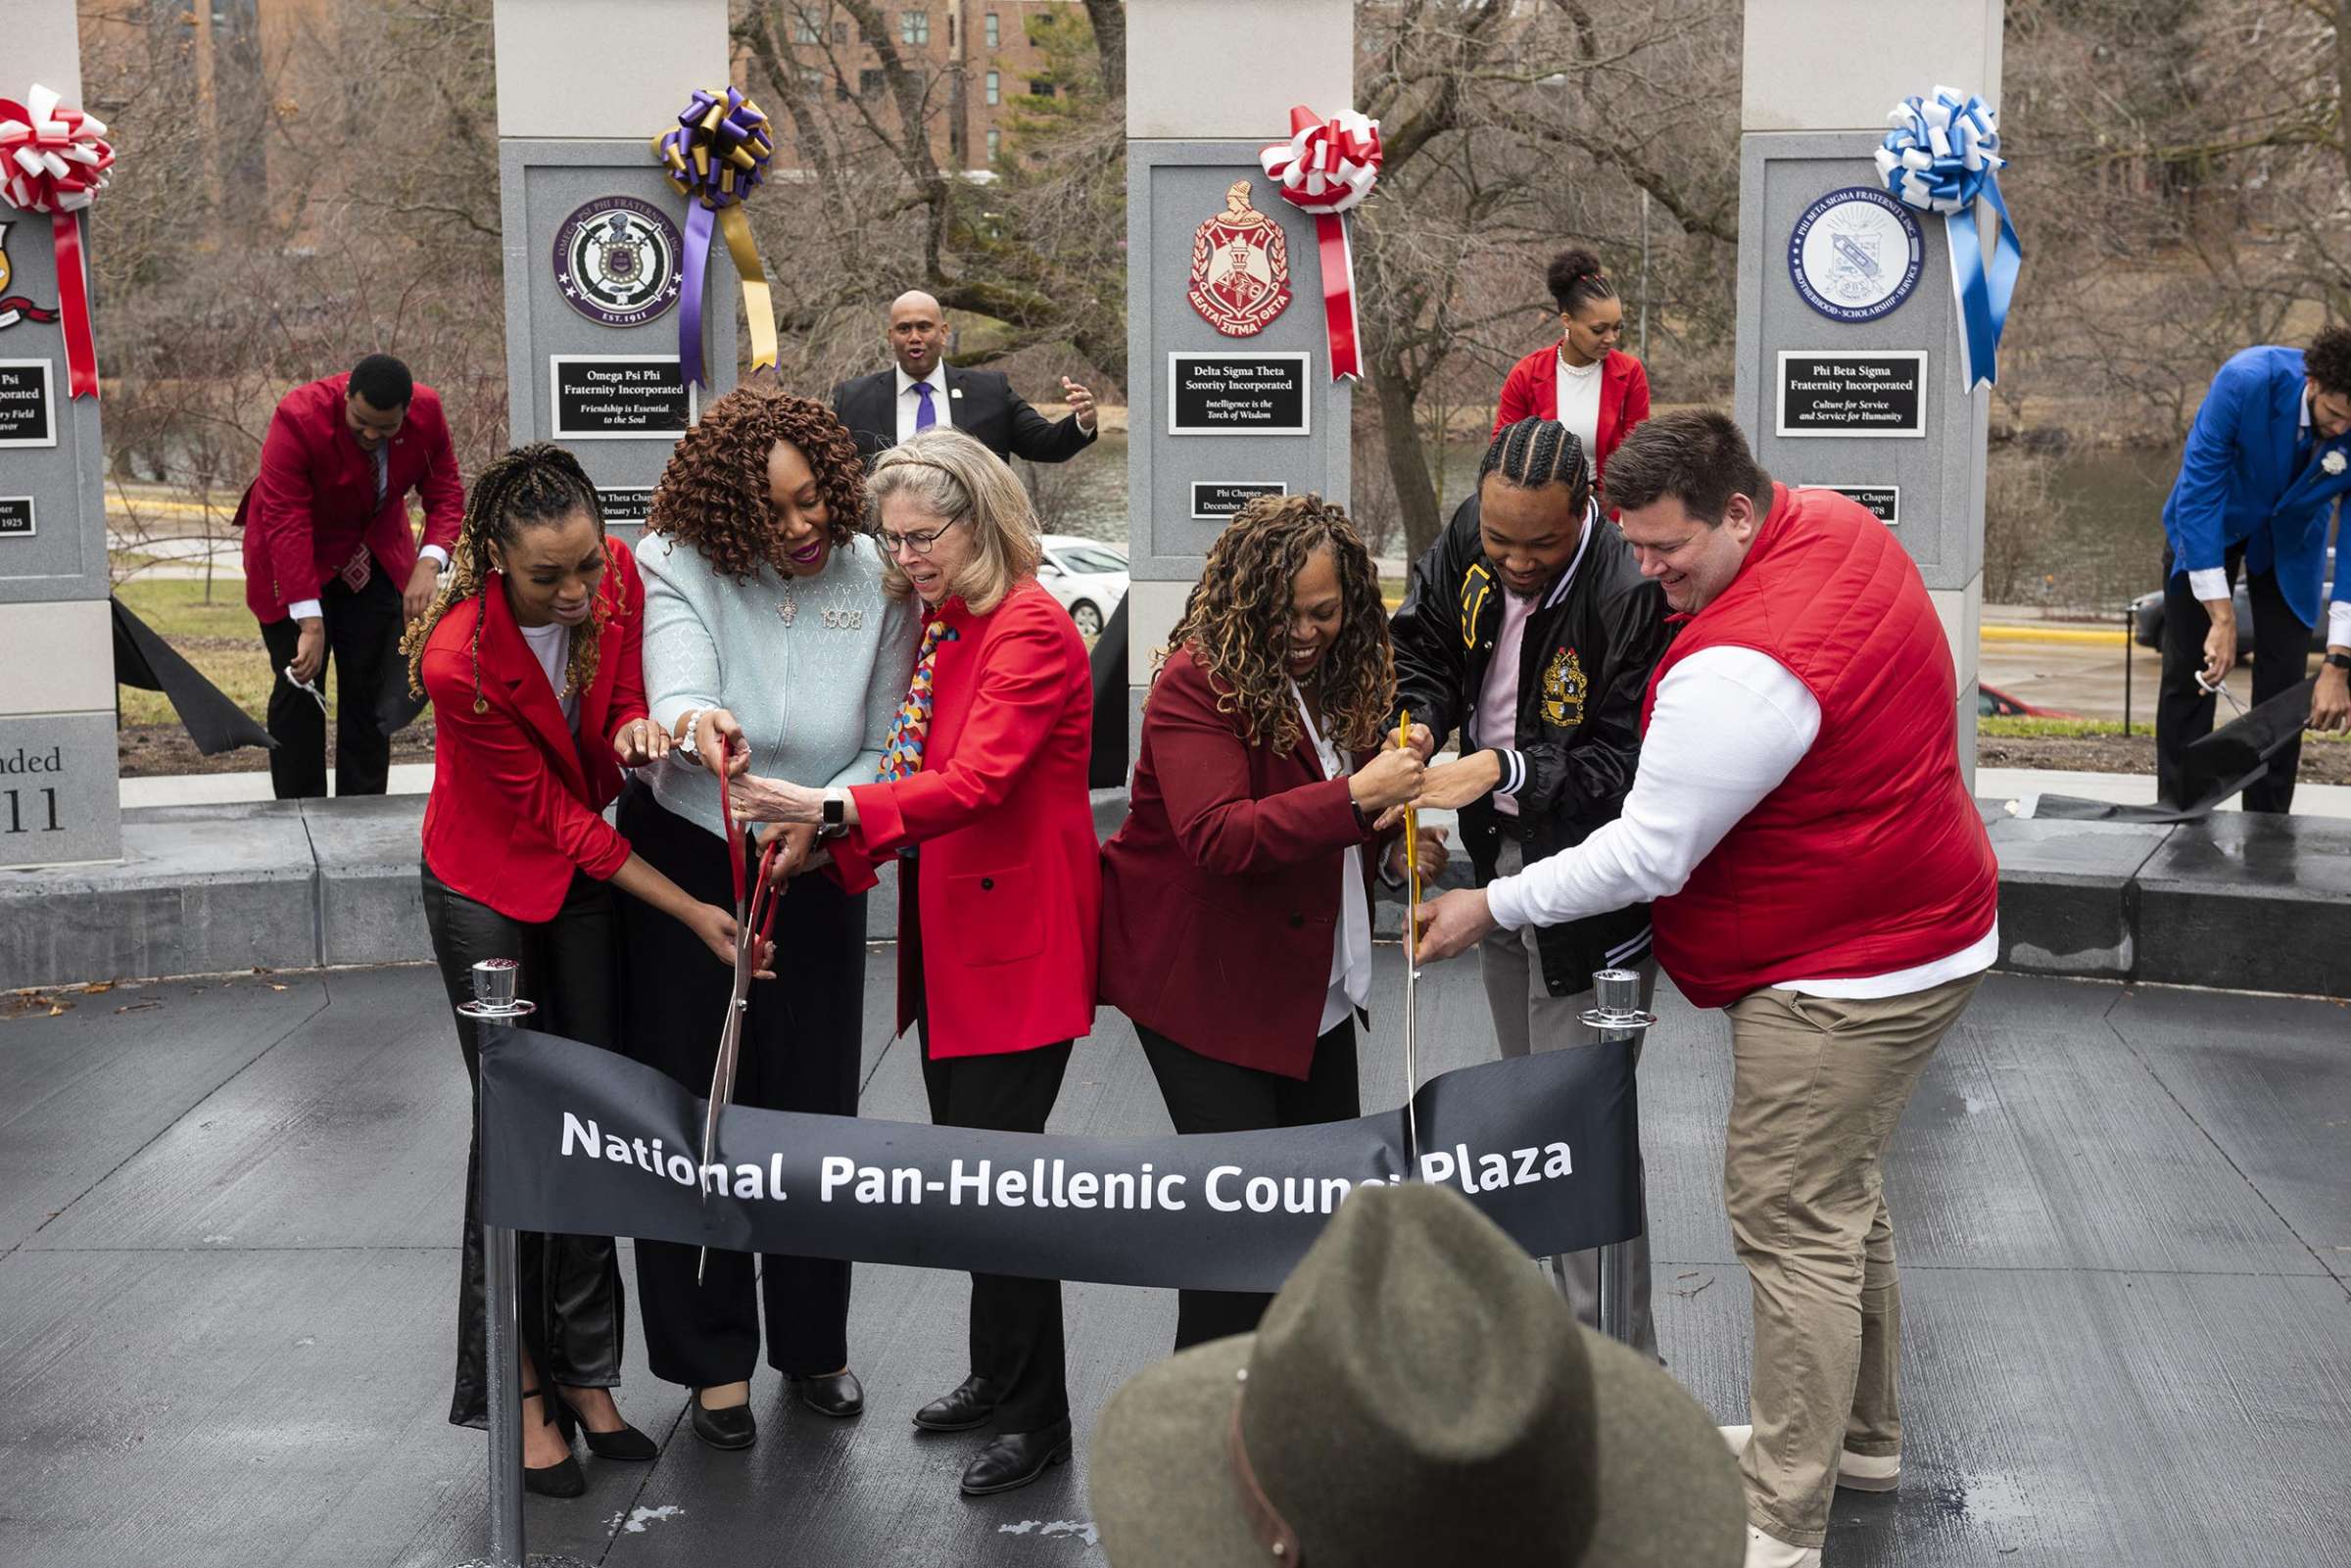 Ribbon cutting ceremony at the National Panhellenic Council Plaza